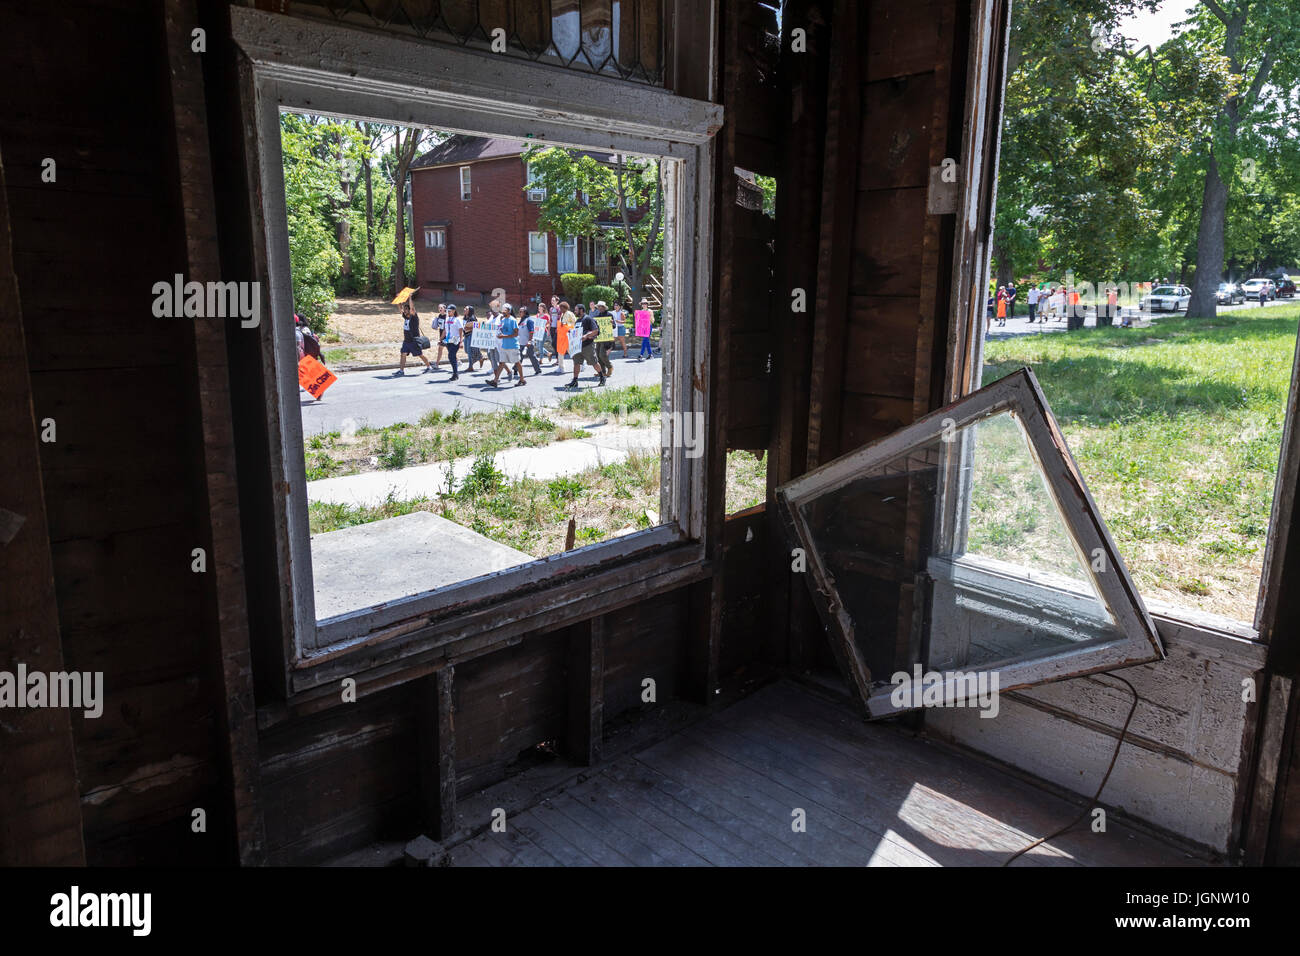 Detroit, Michigan, USA. 8th July, 2017. Detroit residents march through the Islandview neighborhood to protest lack of support for the city's neighborhoods. They say investment has been concentrated downtown, while neighborhood schools, libraries, and recreation centers have been closed and low-income residents displaced by mortgage and tax foreclosures. They say long-time residents are now threatened by gentrification of parts of their community. Credit: Jim West/Alamy Live News Stock Photo